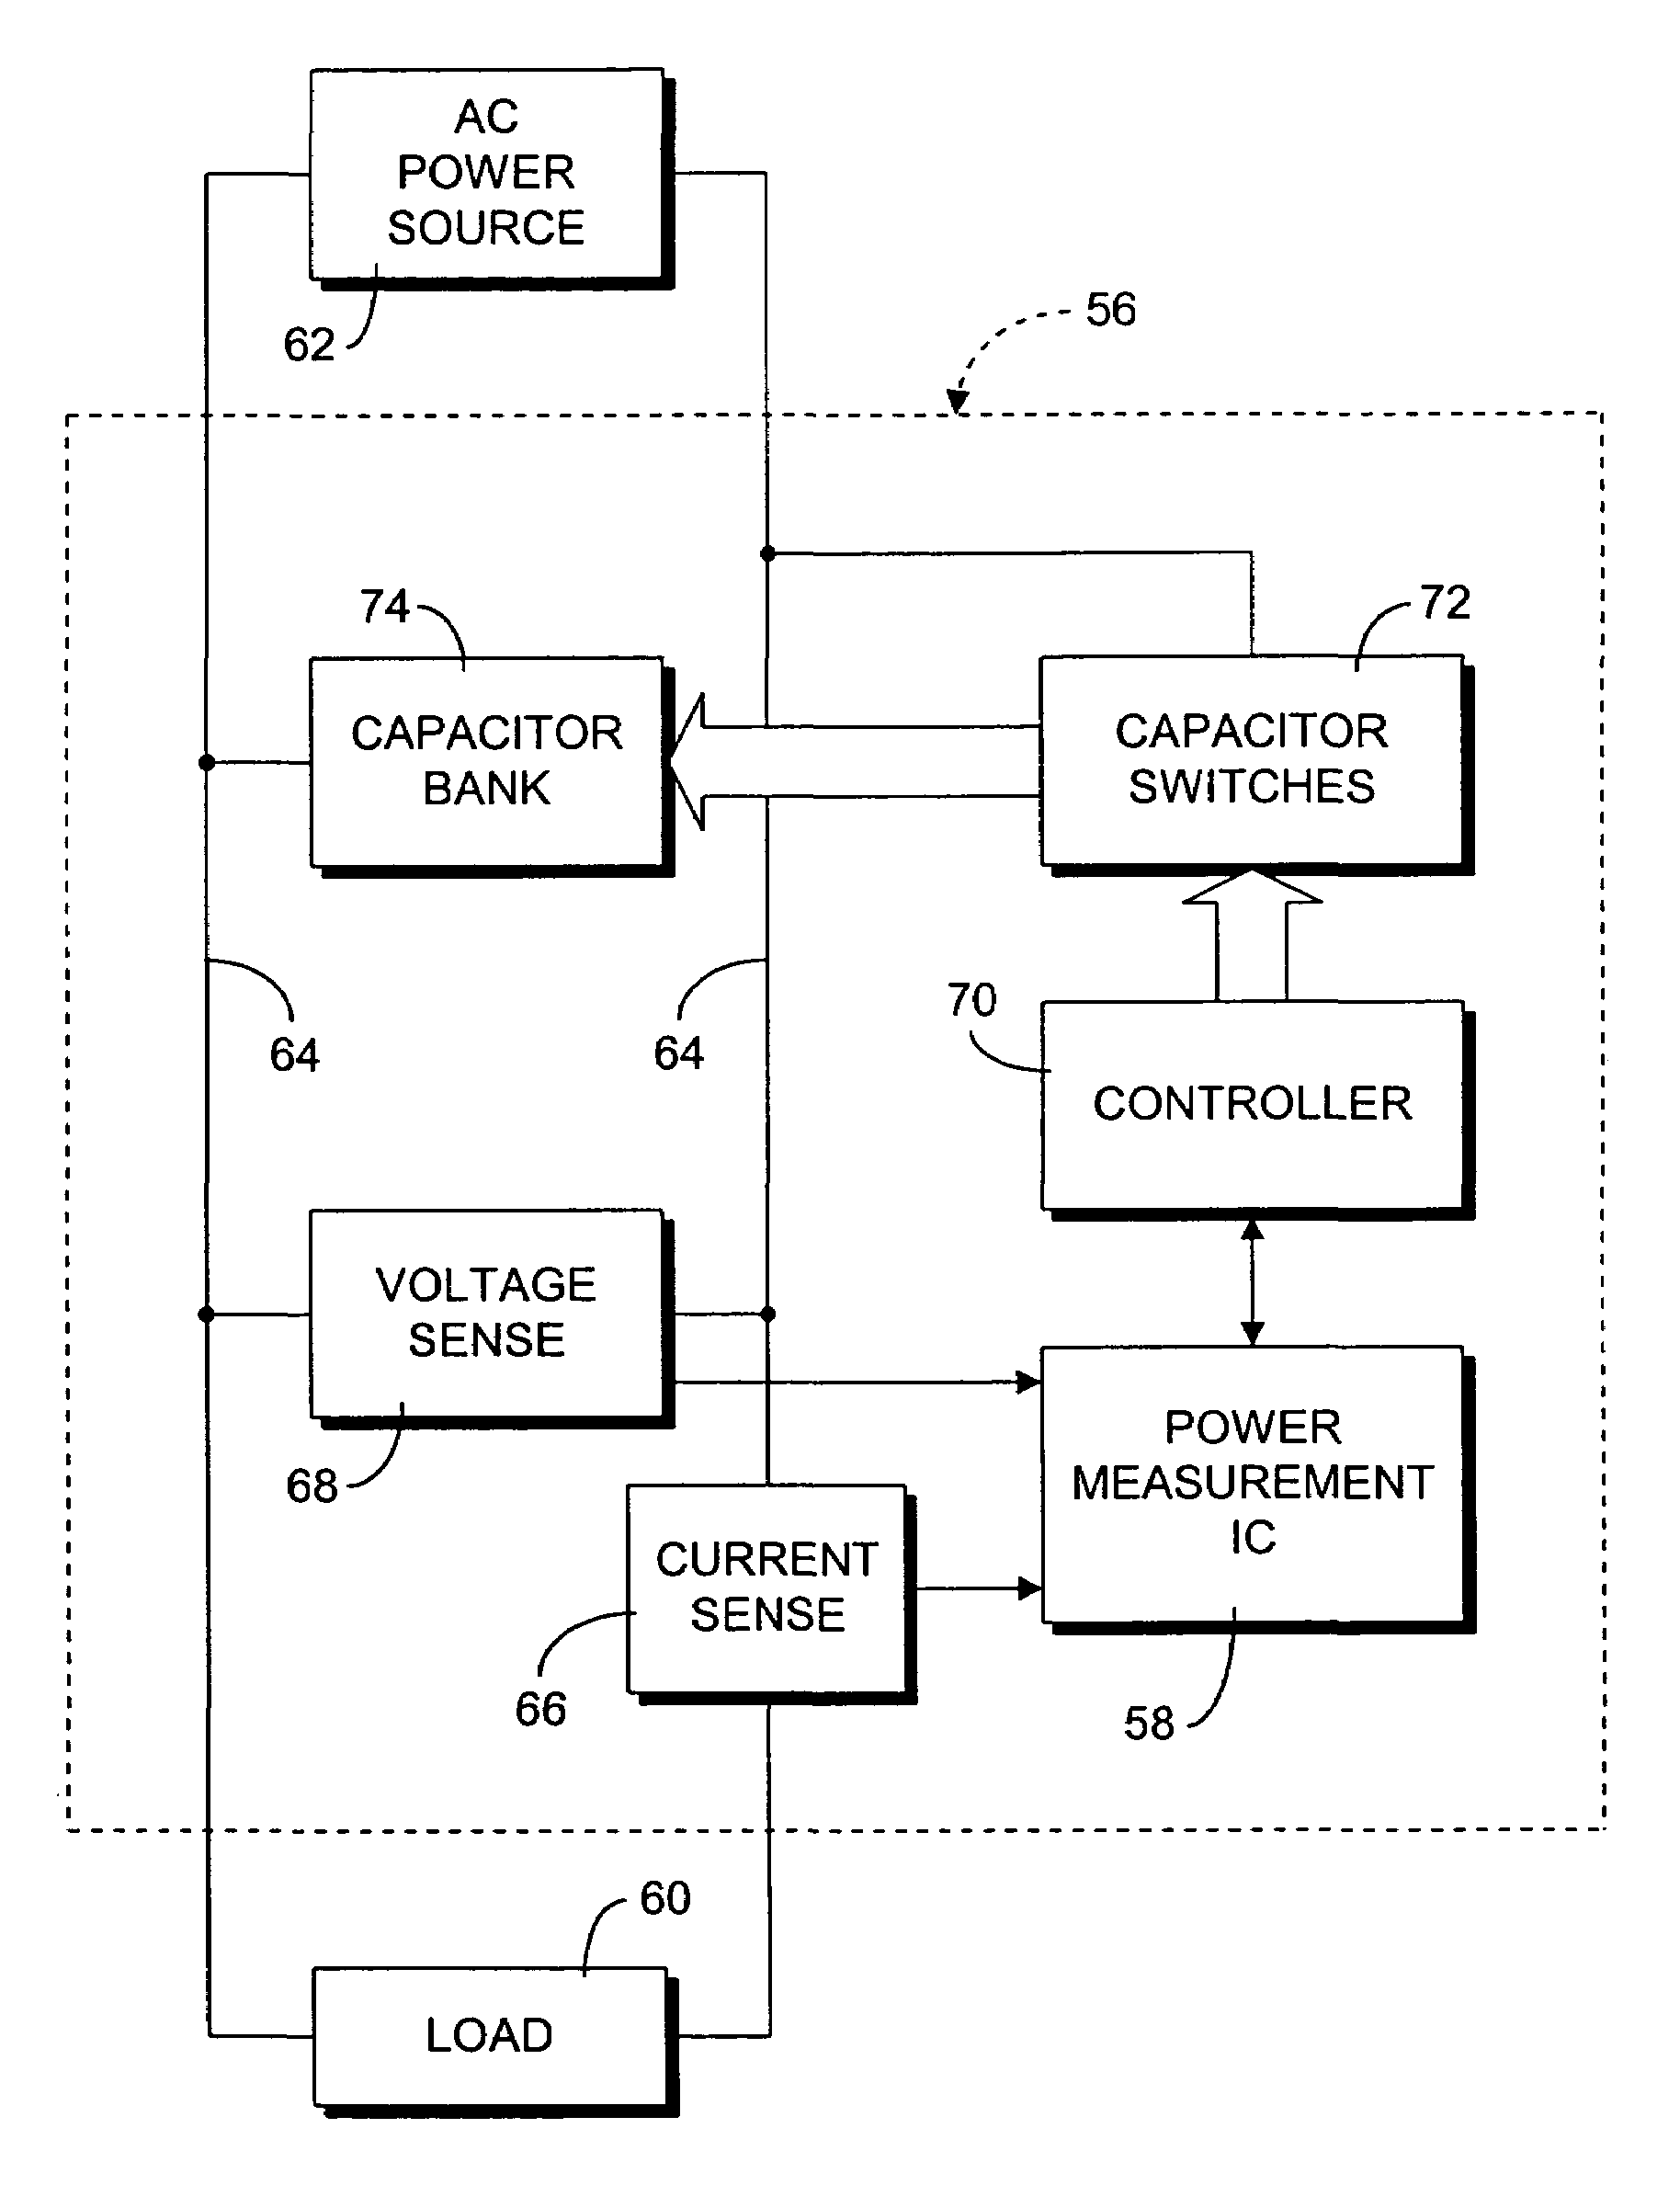 Automatic power factor correction using power measurement chip